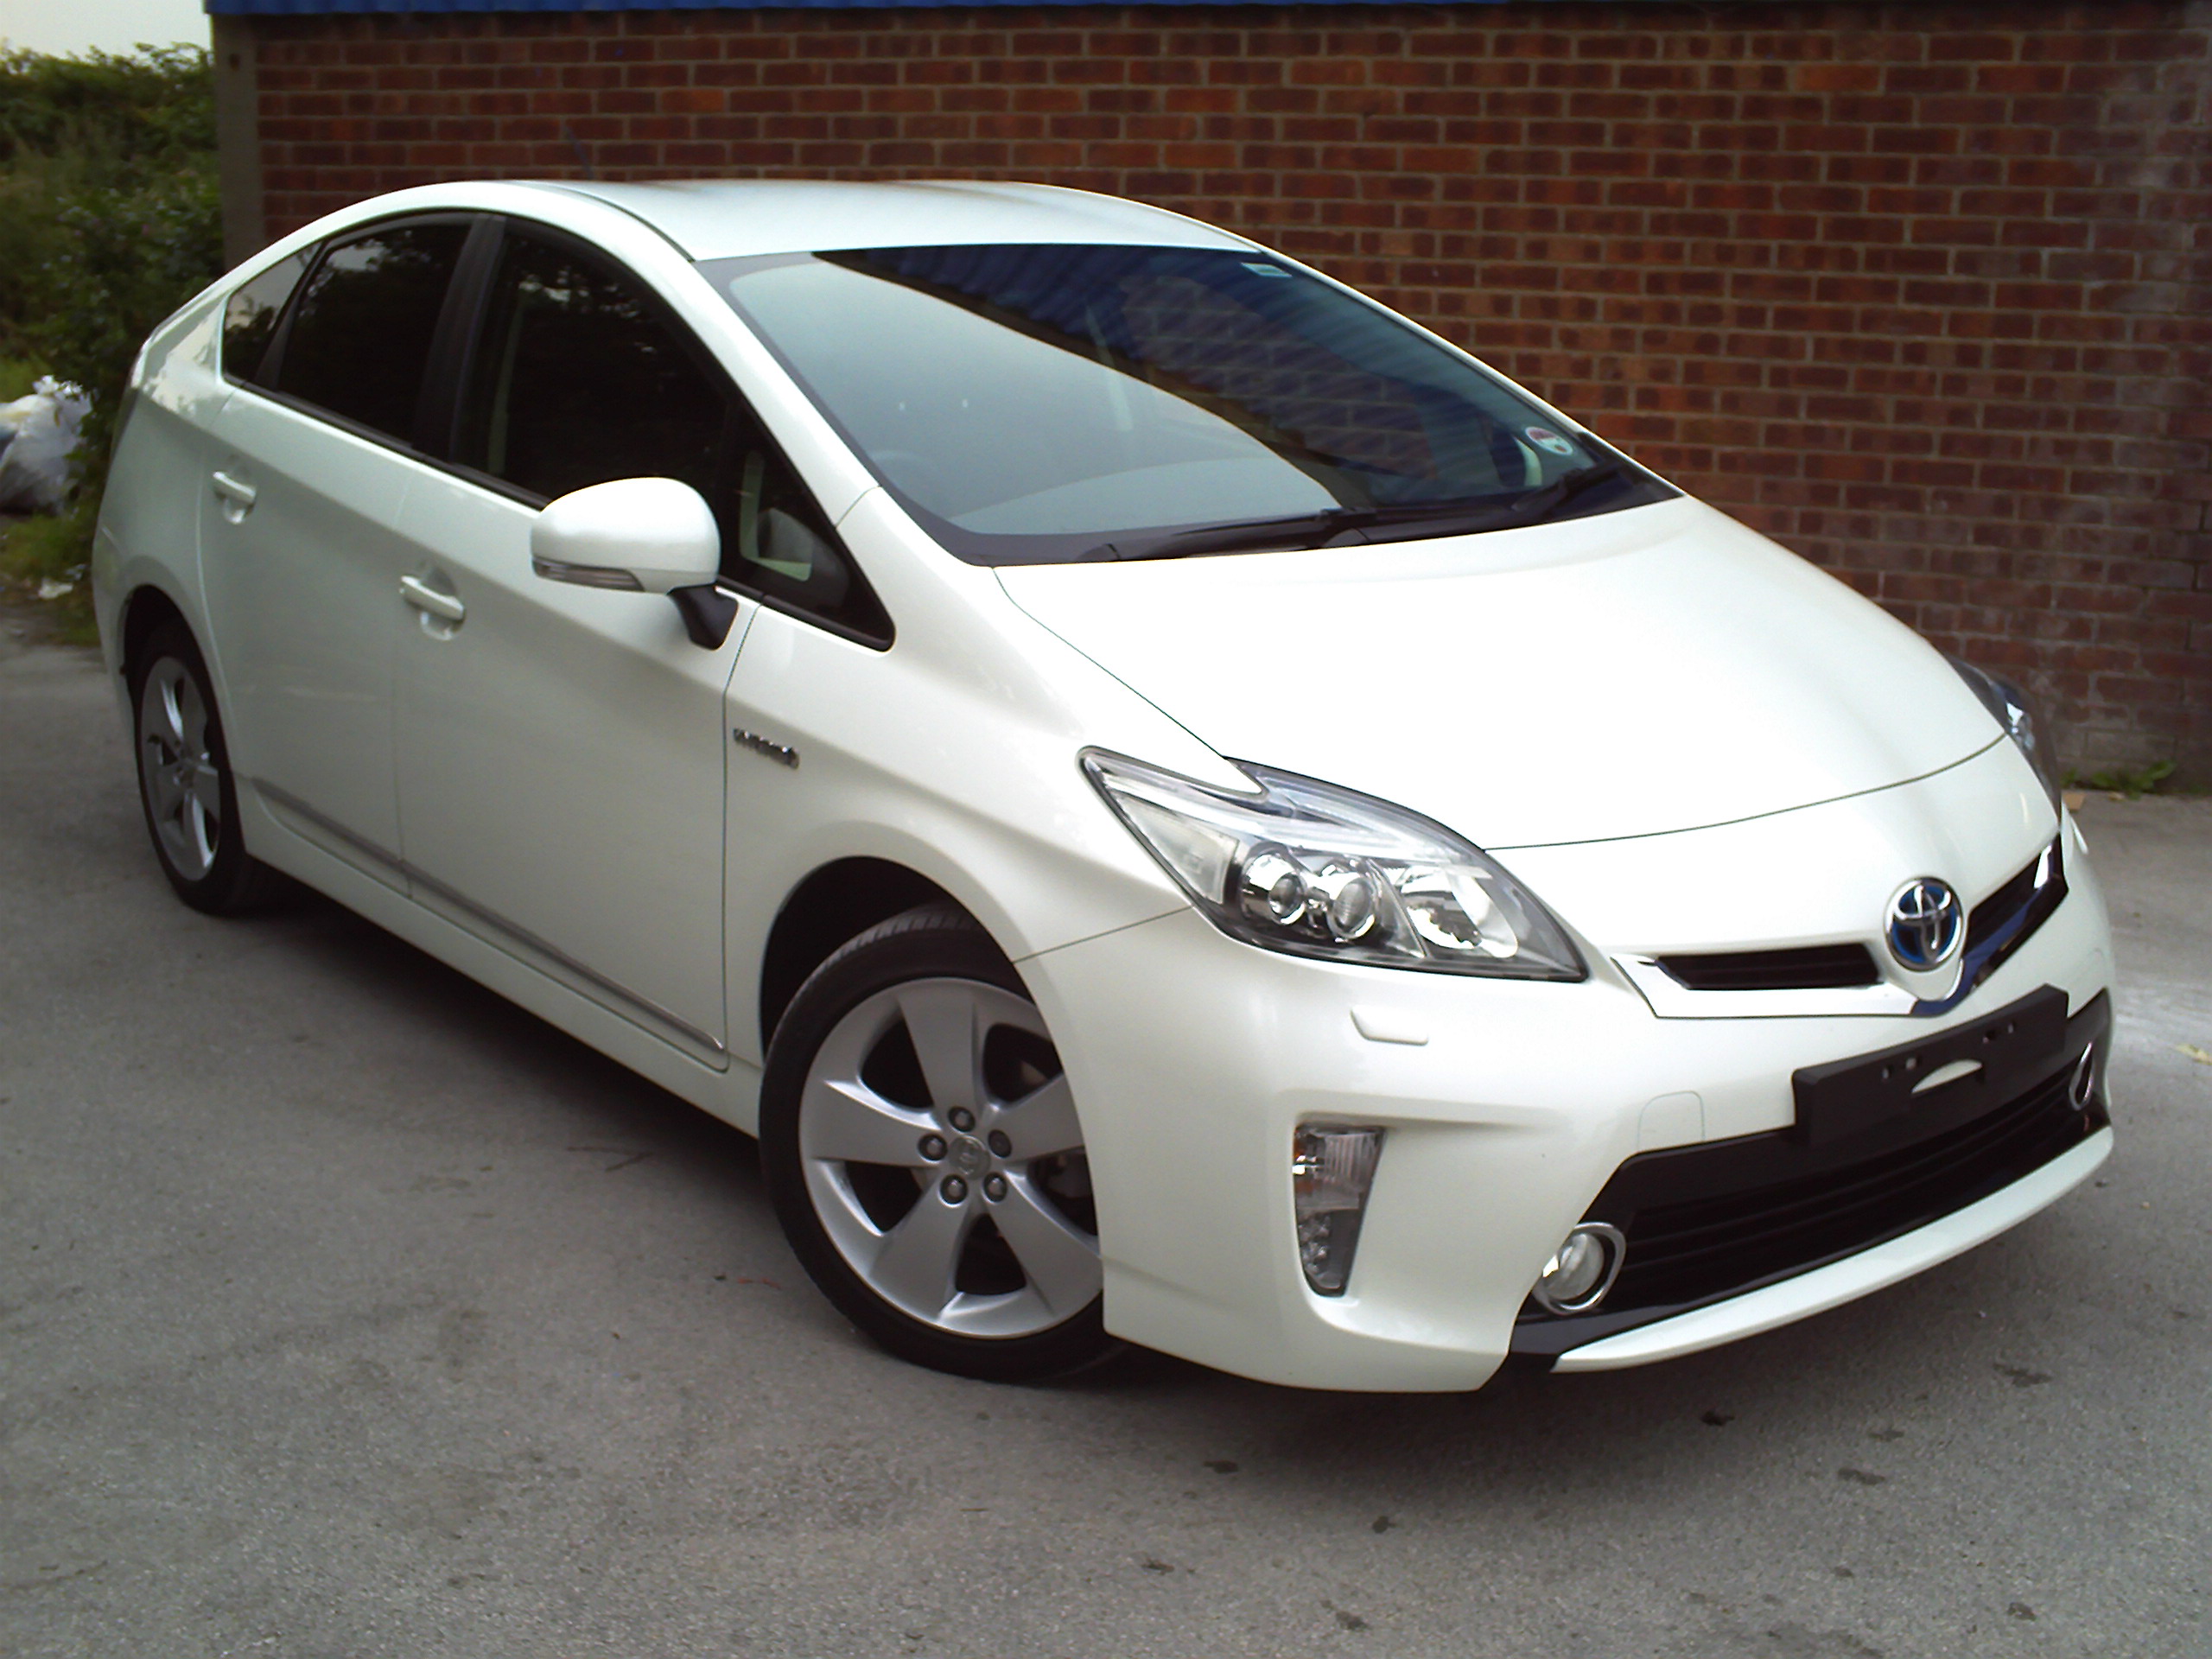 Toyota Prius after extremely satisfied customer has picked up their vehicle for collection from our facilities based in Hull